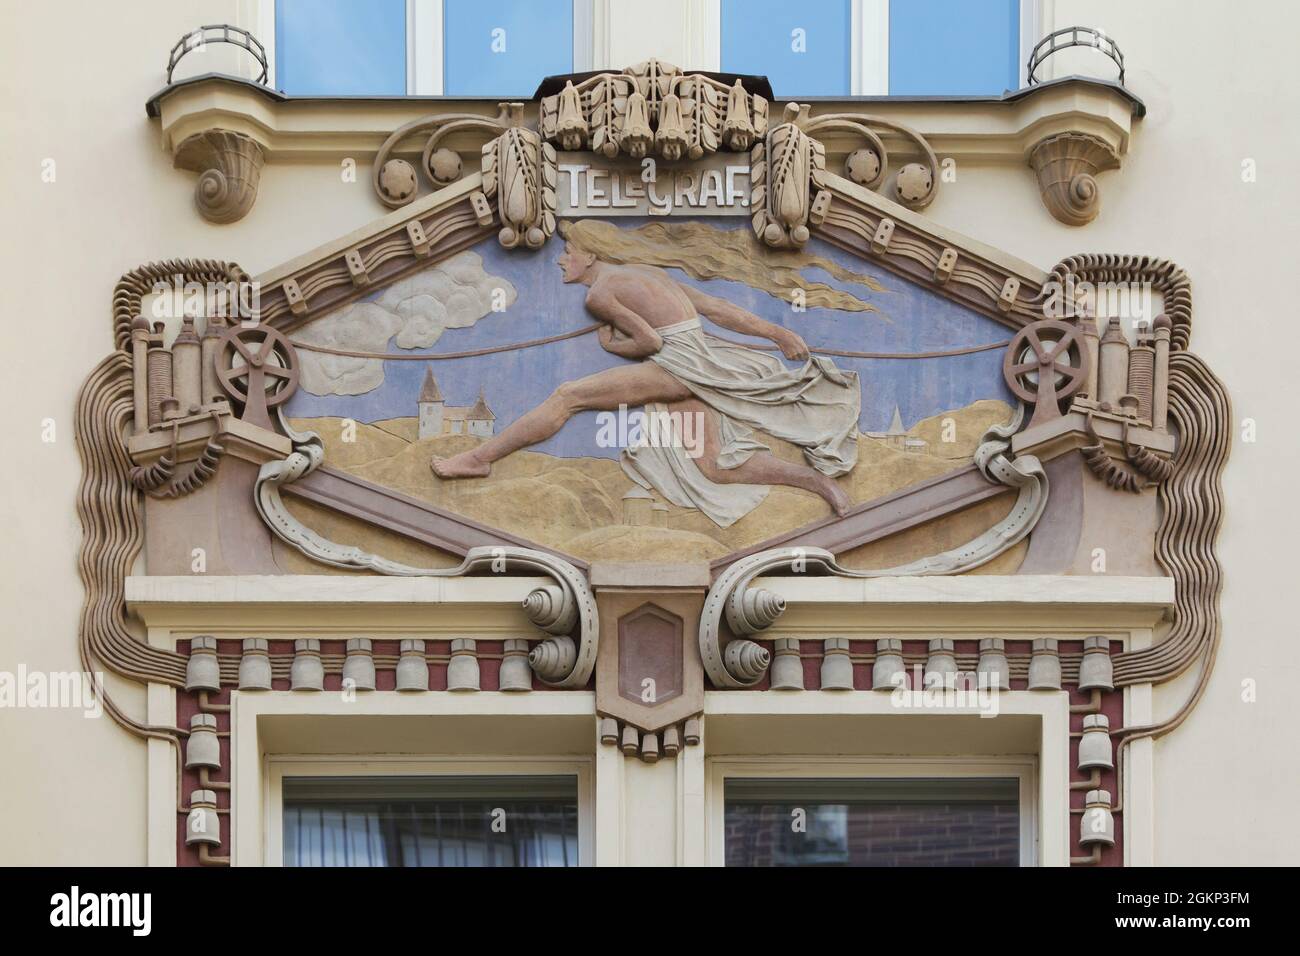 Telegraph depicted in the stucco relief on the Edvard Beaufort Publishing (Beaufortovo nakladatelství) in Nové Město (New Town) in Prague, Czech Republic. The Art Nouveau building designed by Czech architect Osvald Polívka was built from 1907 to 1910 in Jungmannova Street. Stock Photo